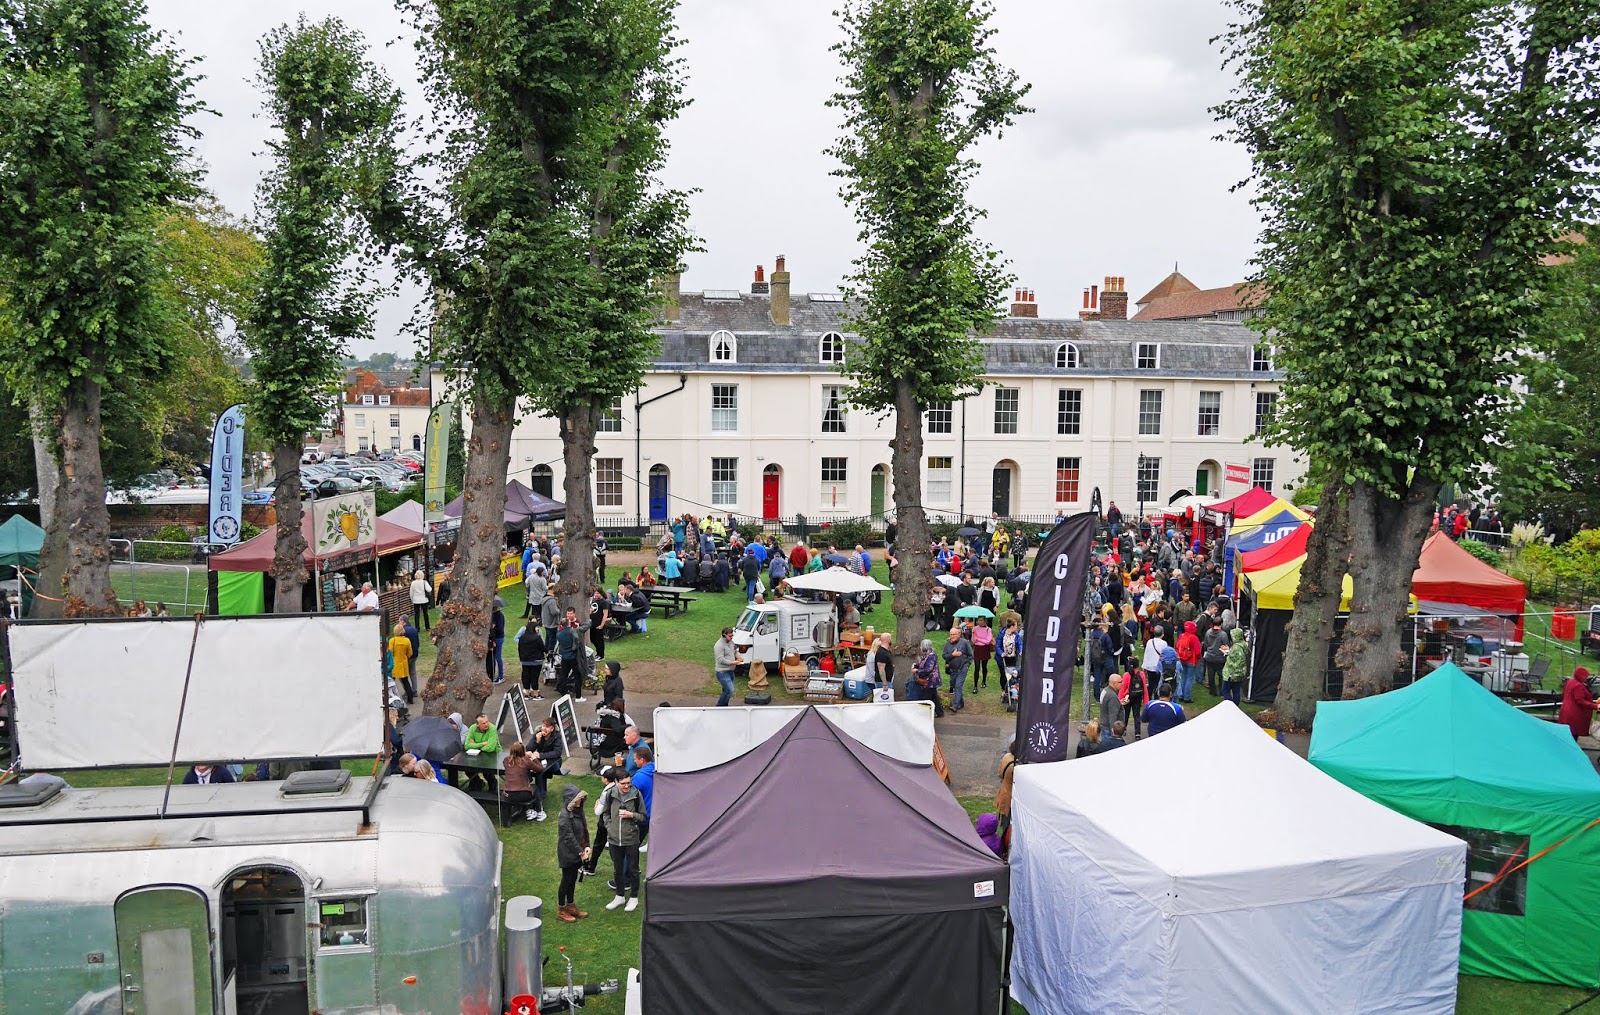 The entrance to the Canterbury Food Festival from above